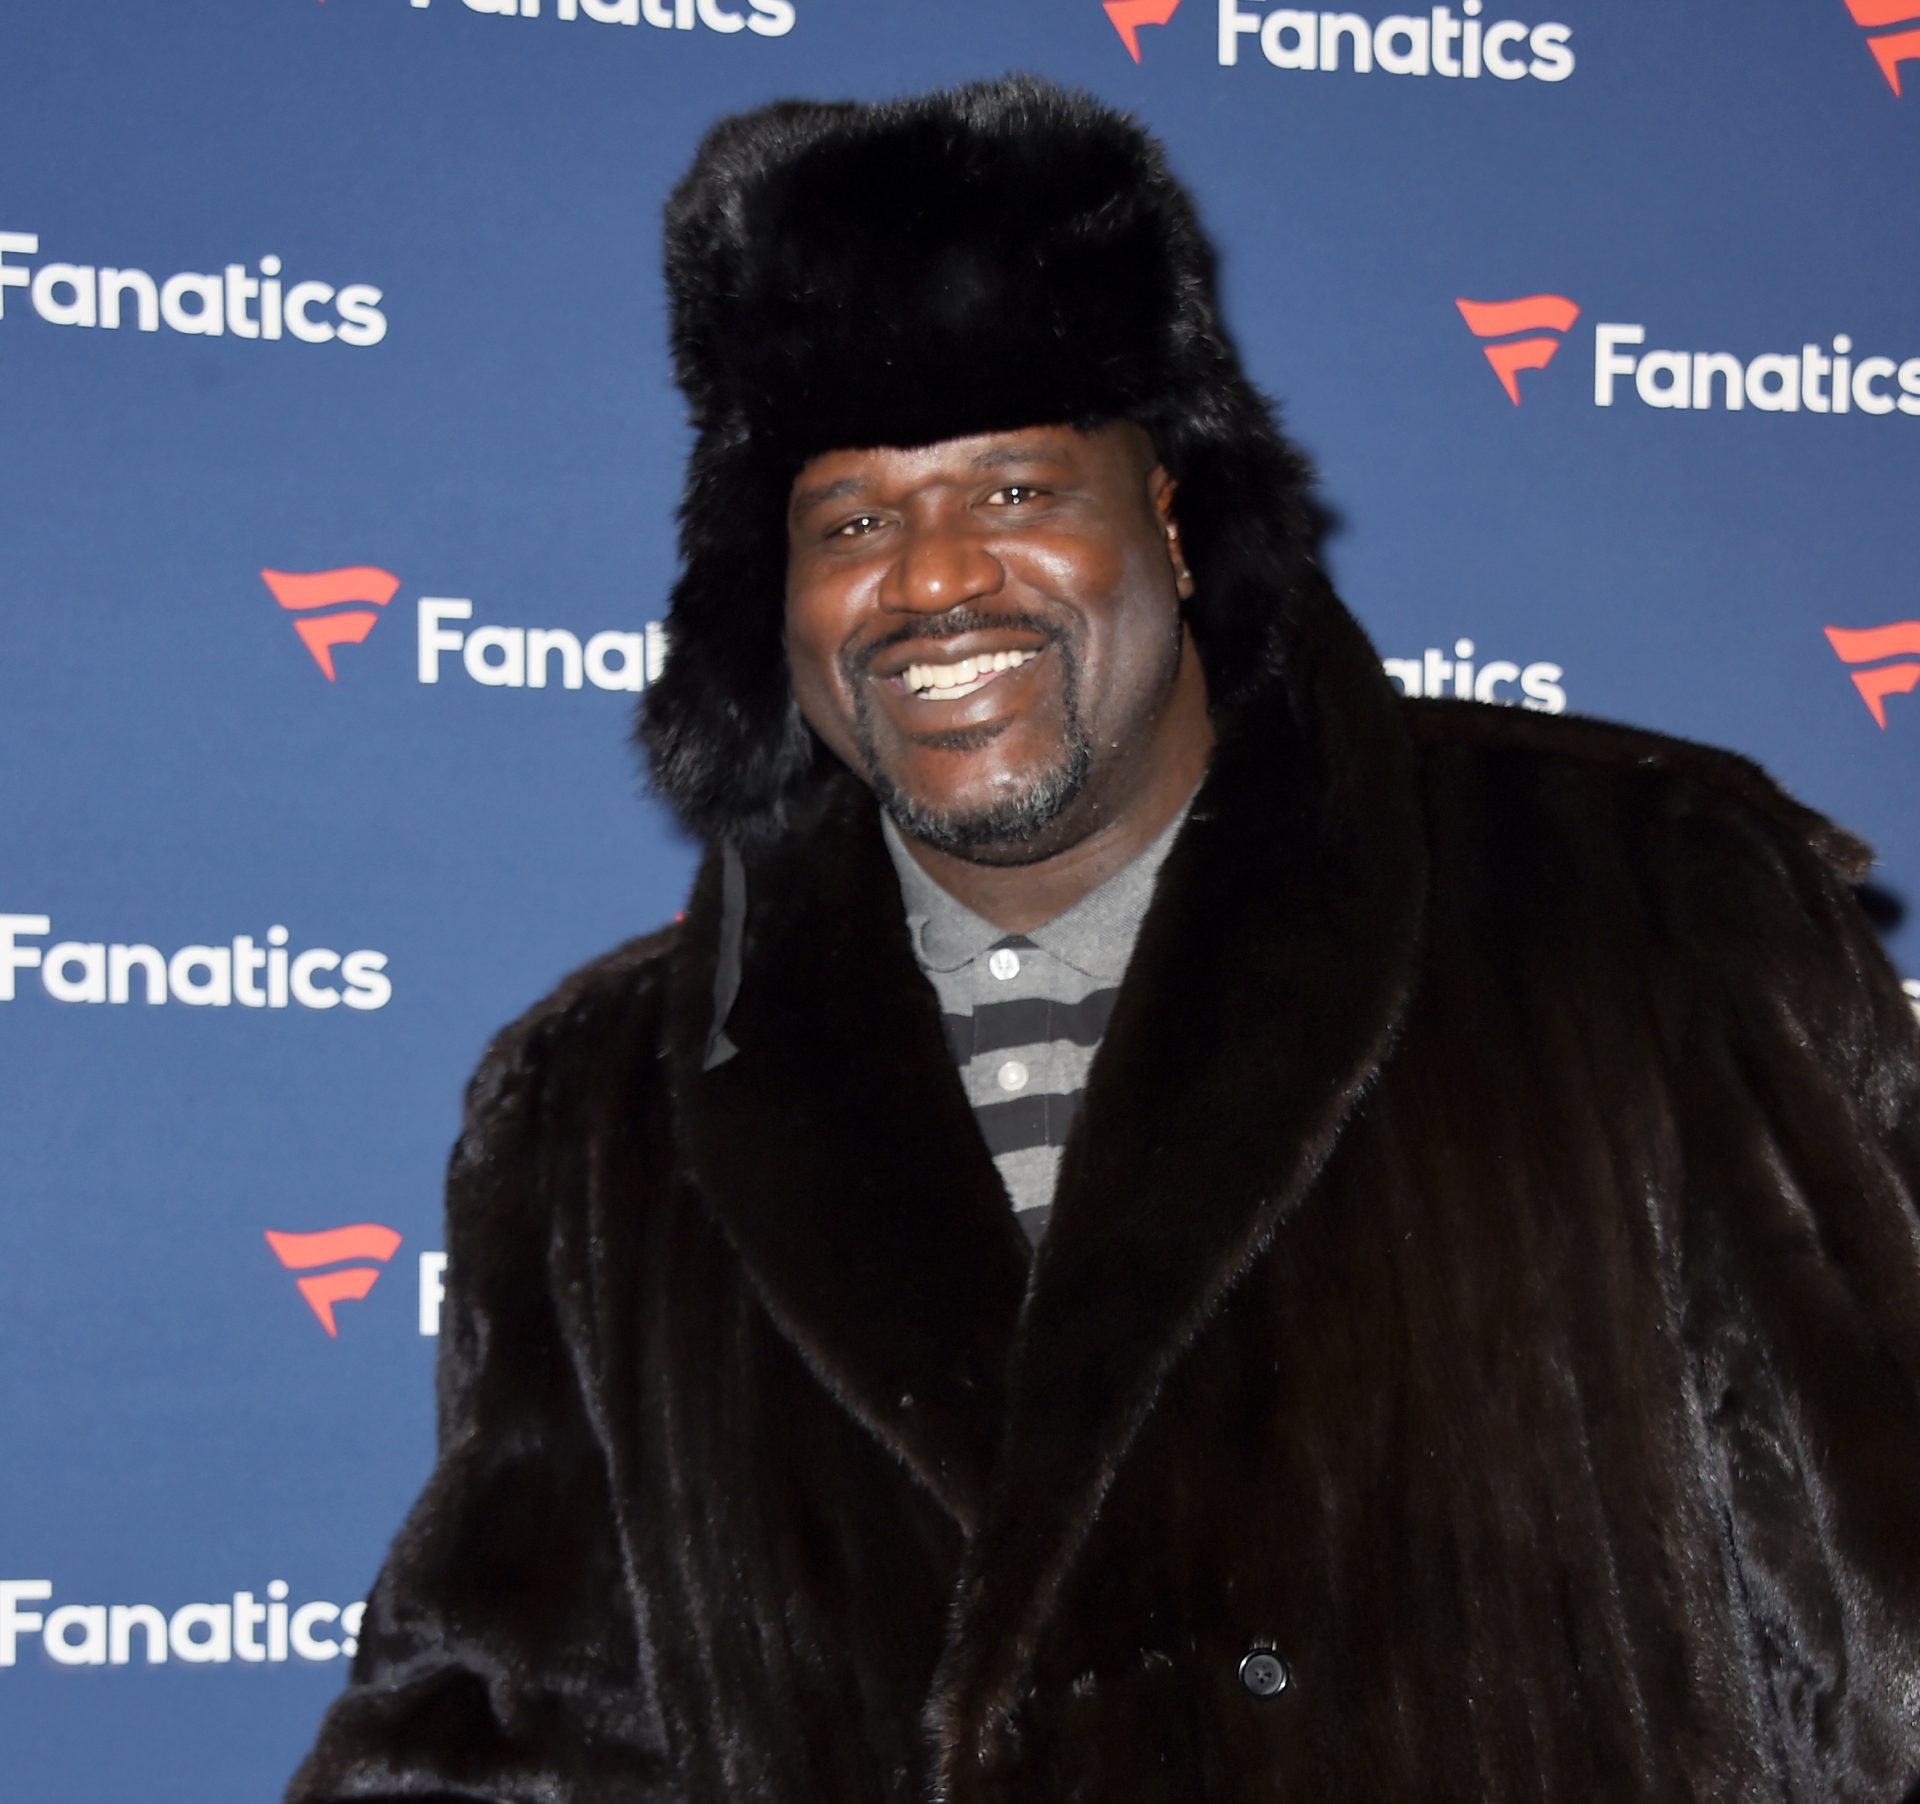 Shaq O'Neal, Dr. J, party with The Chainsmokers at Fanatics Super Bowl event